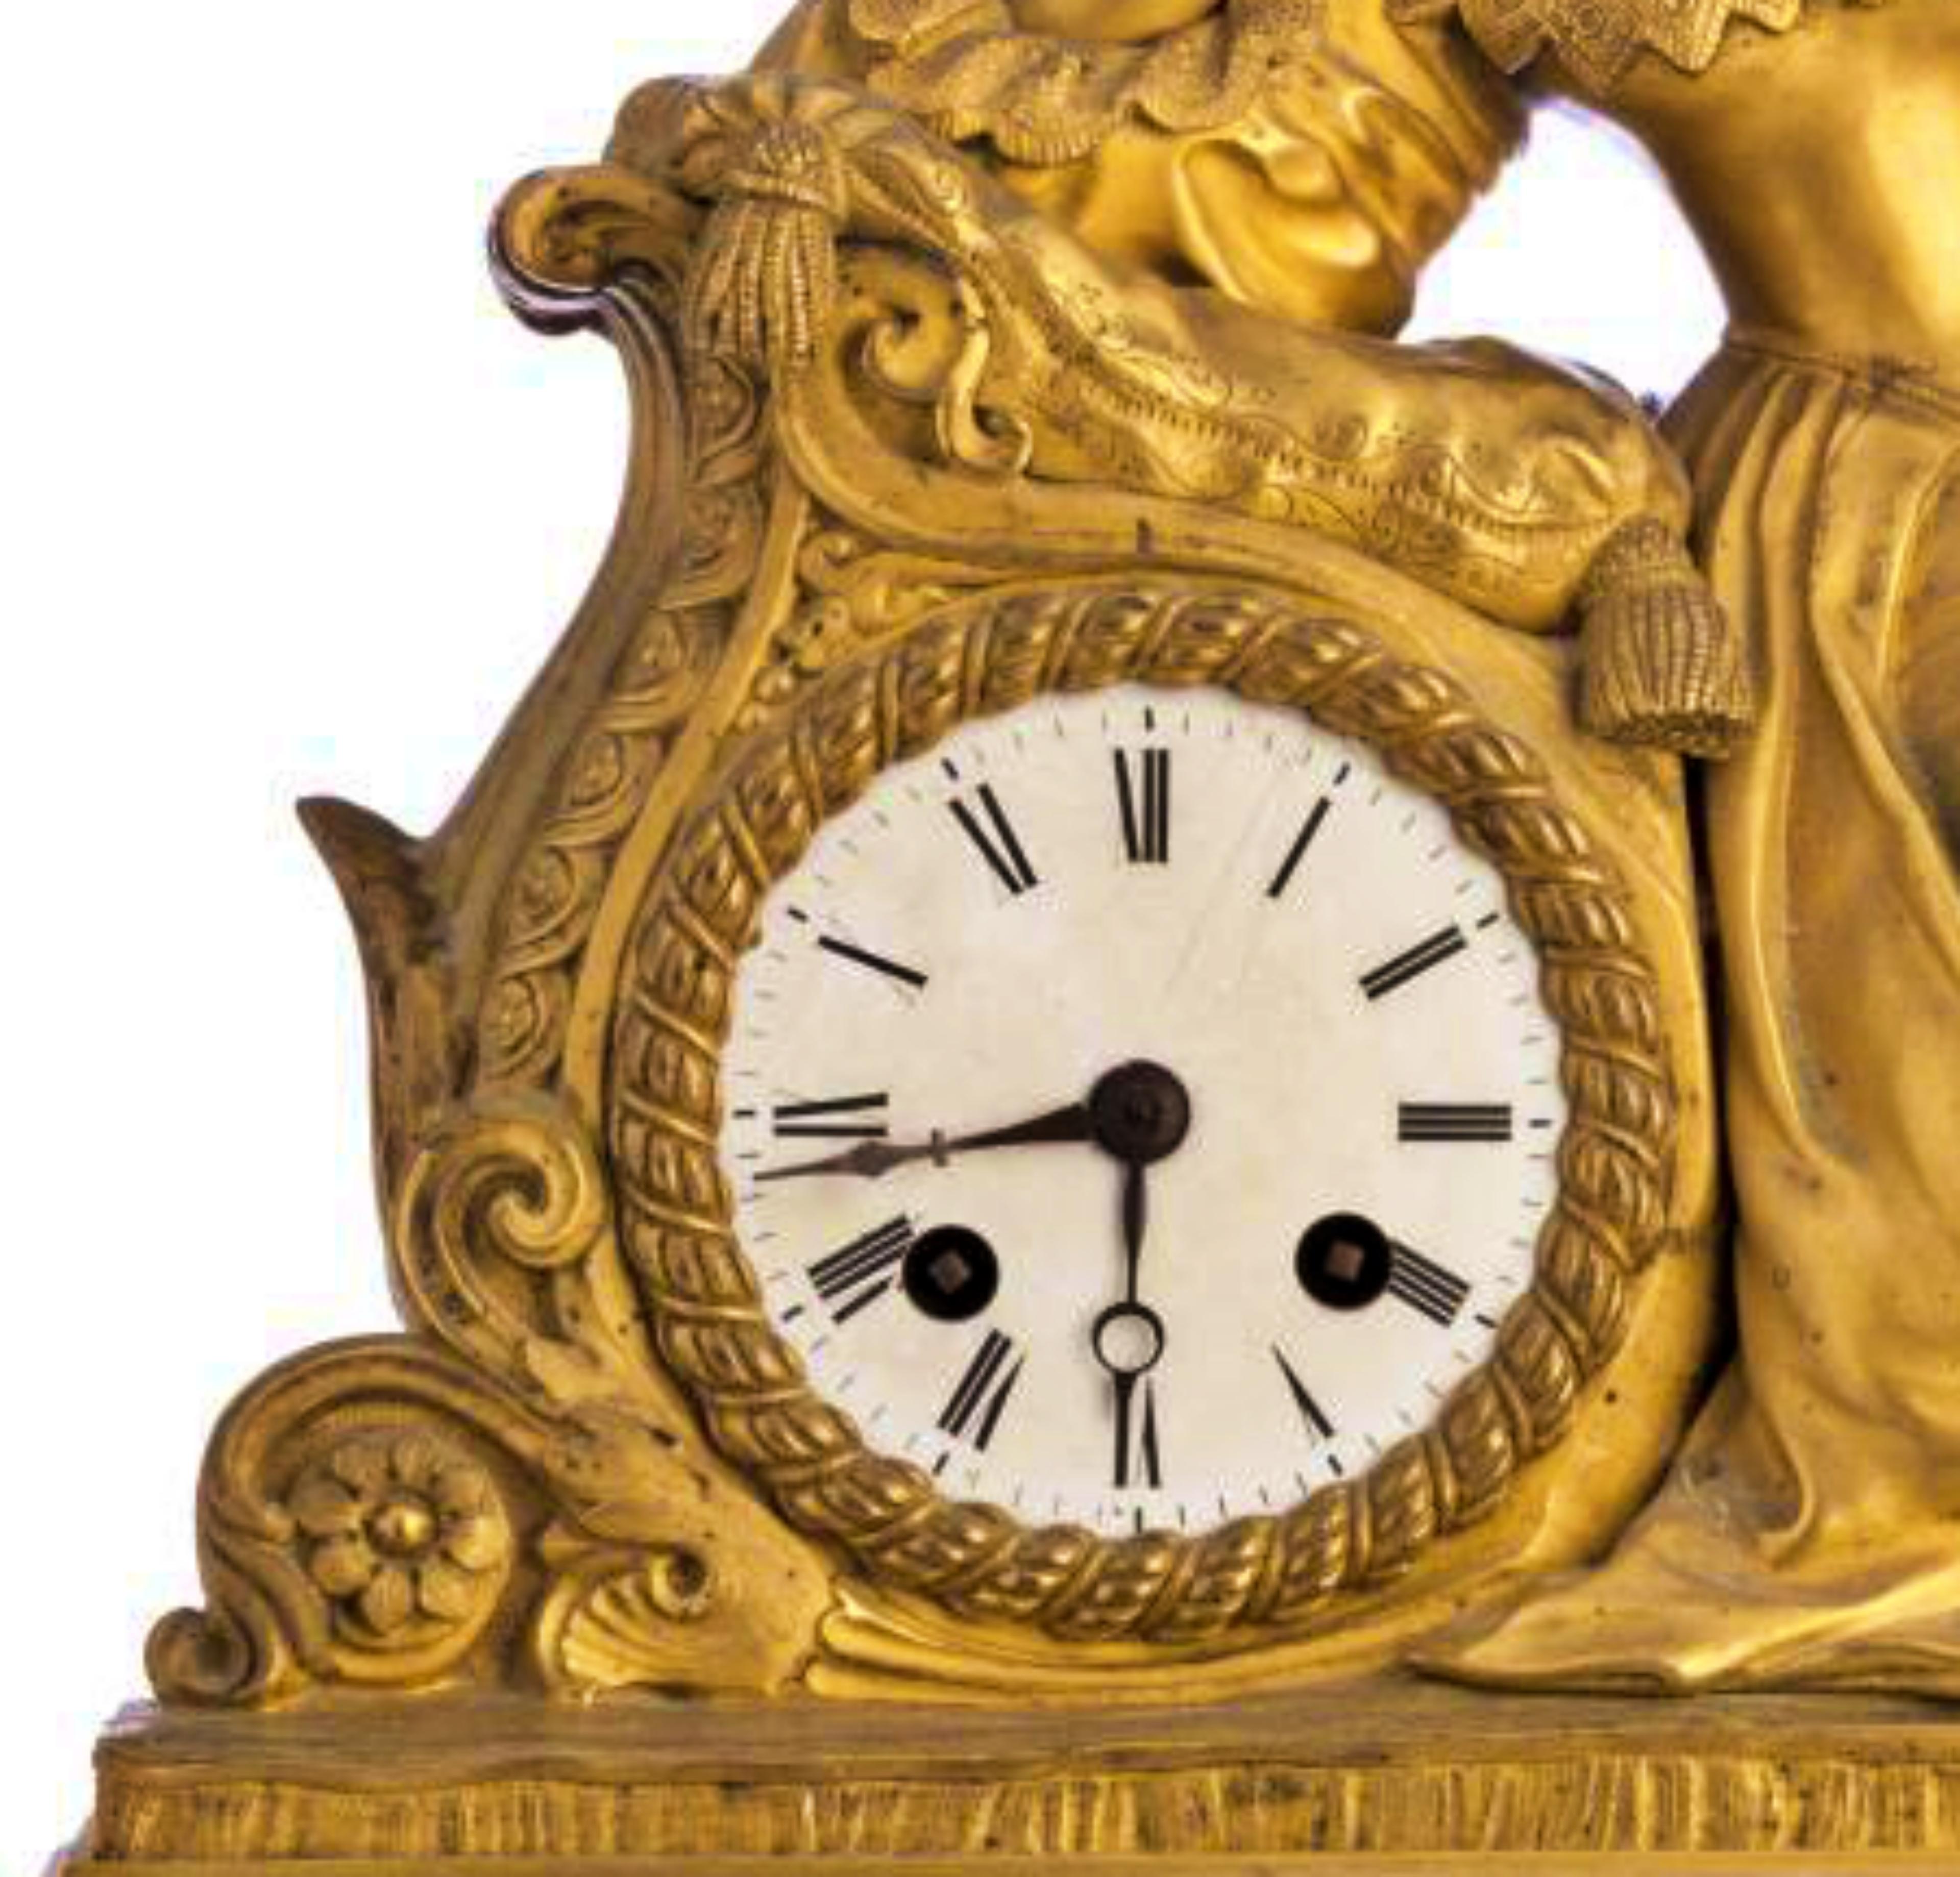 Table clock
French
gilded bronze Empire from the 19th century
decorated with female figure.
White enamel dial with black Roman numerals.
Measures: 43 cm x 54 cm.